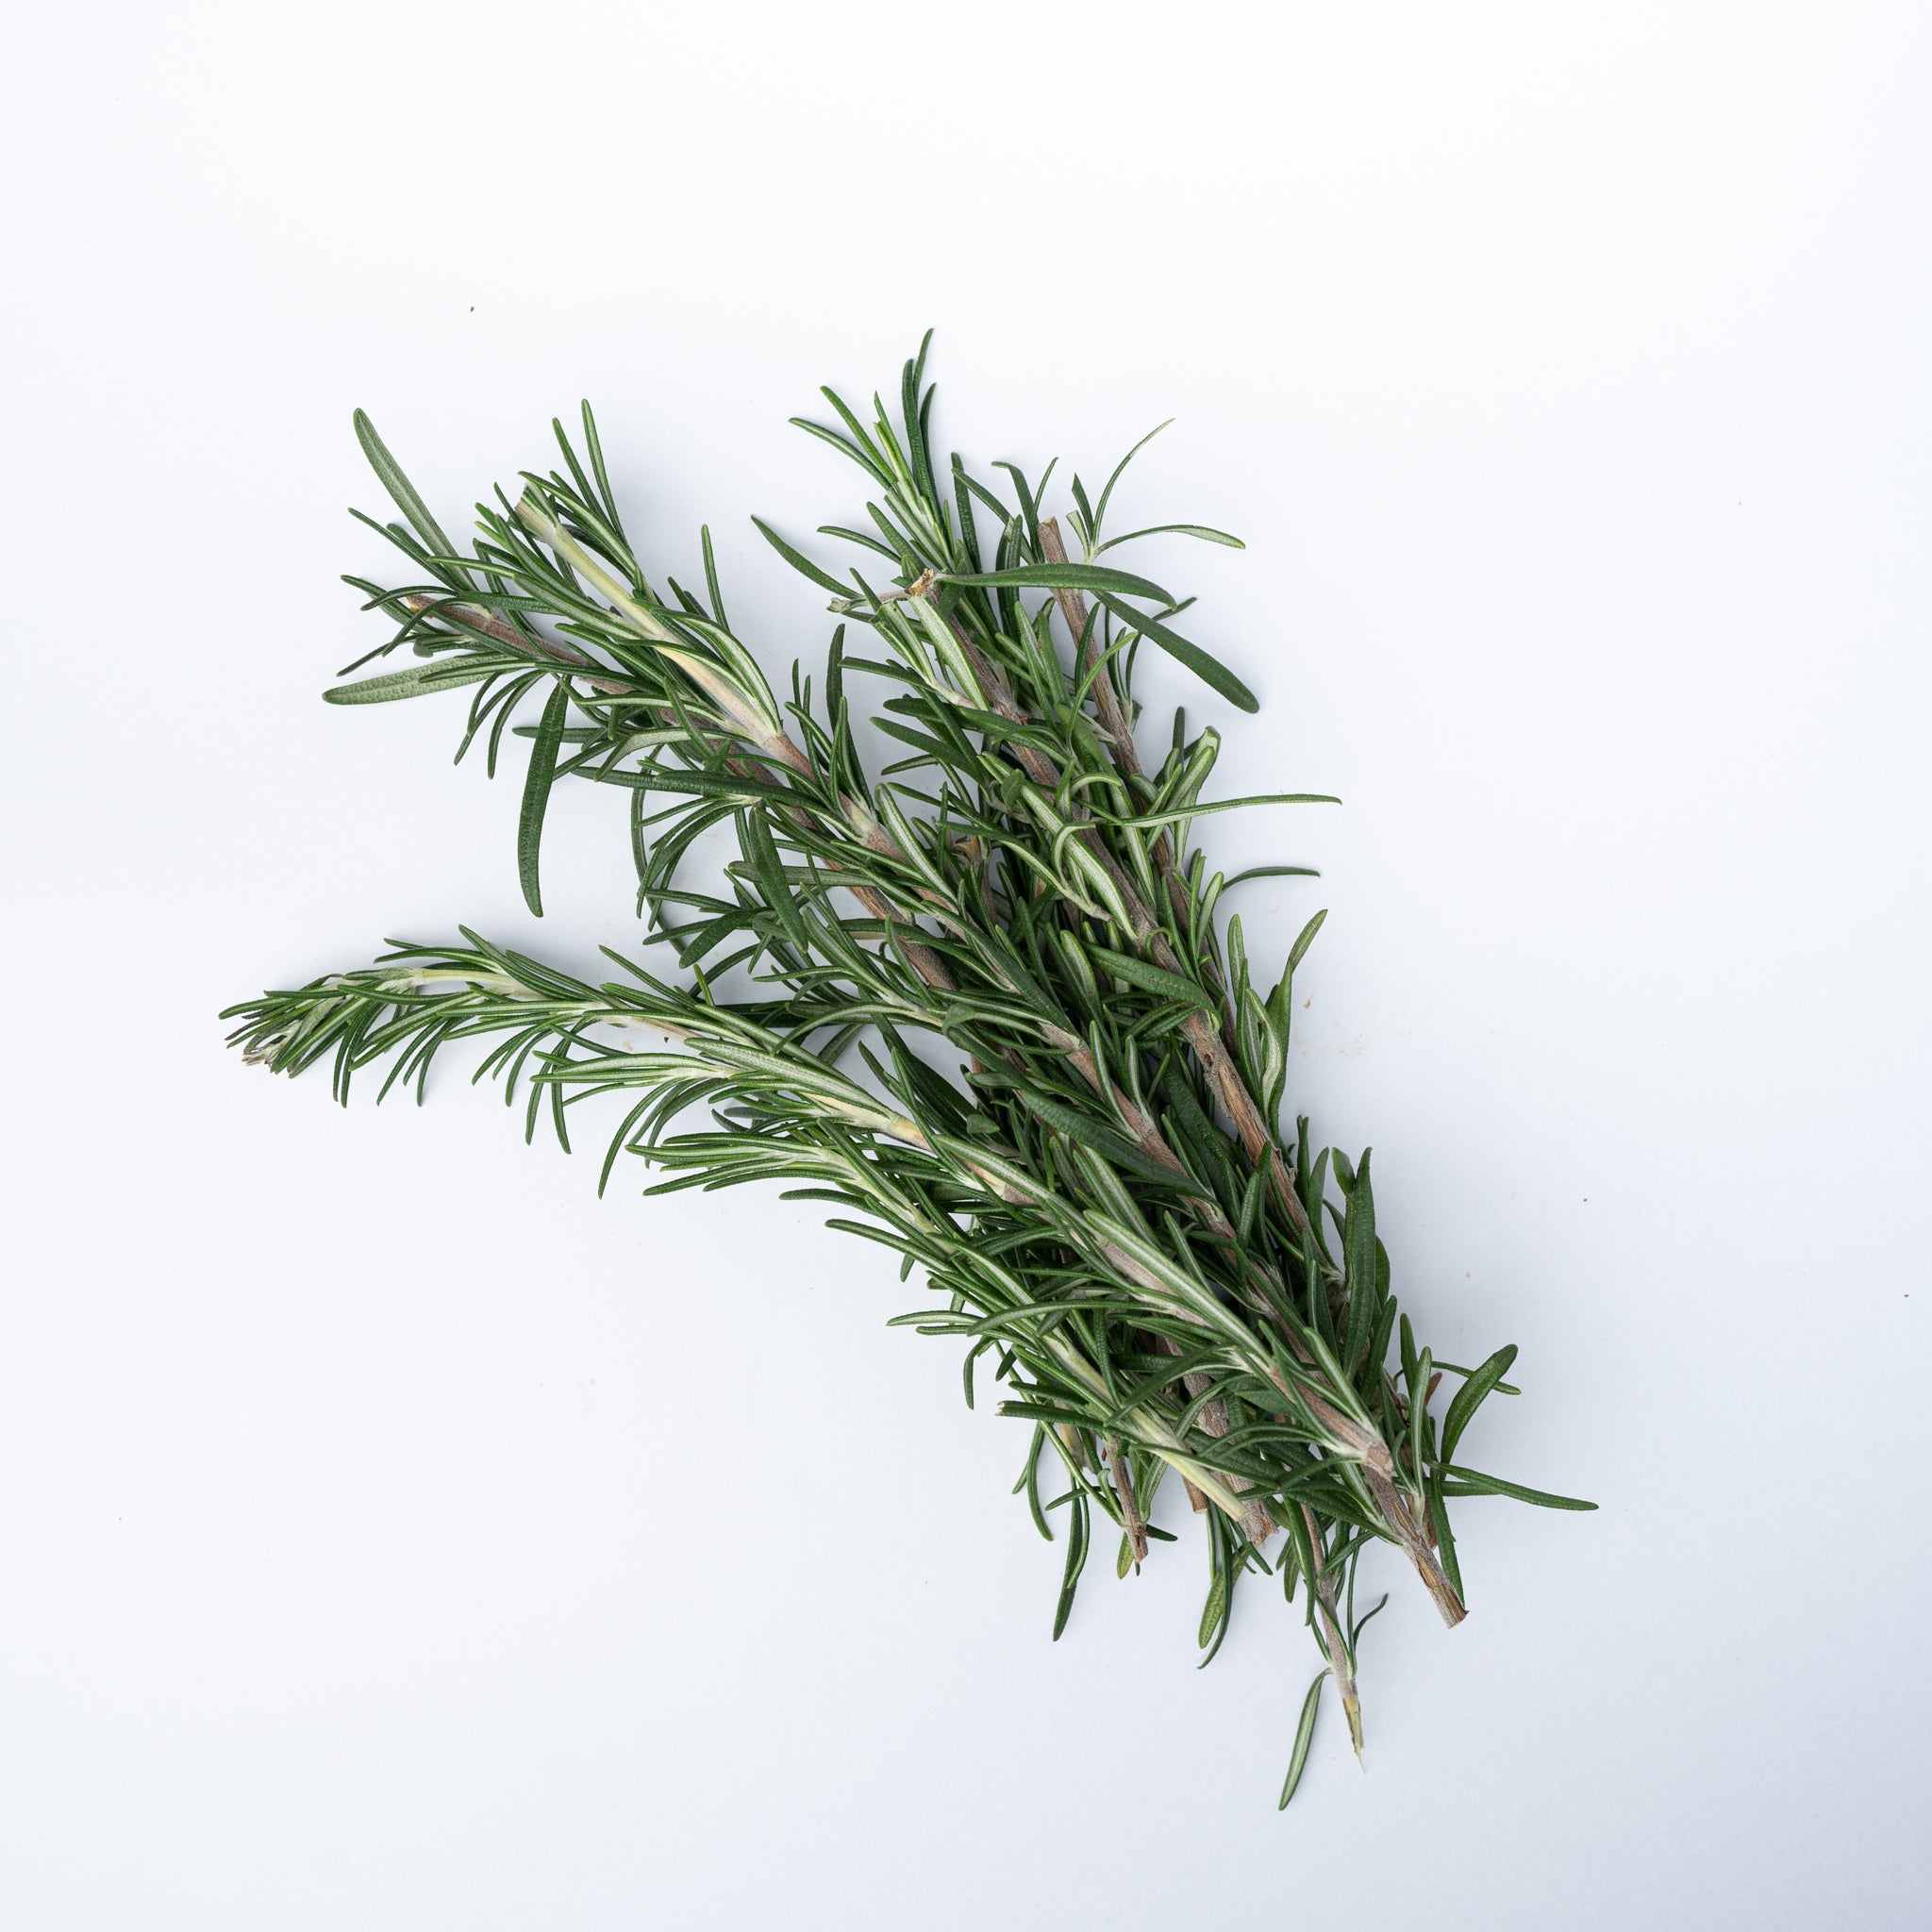 A bunch of rosemary.